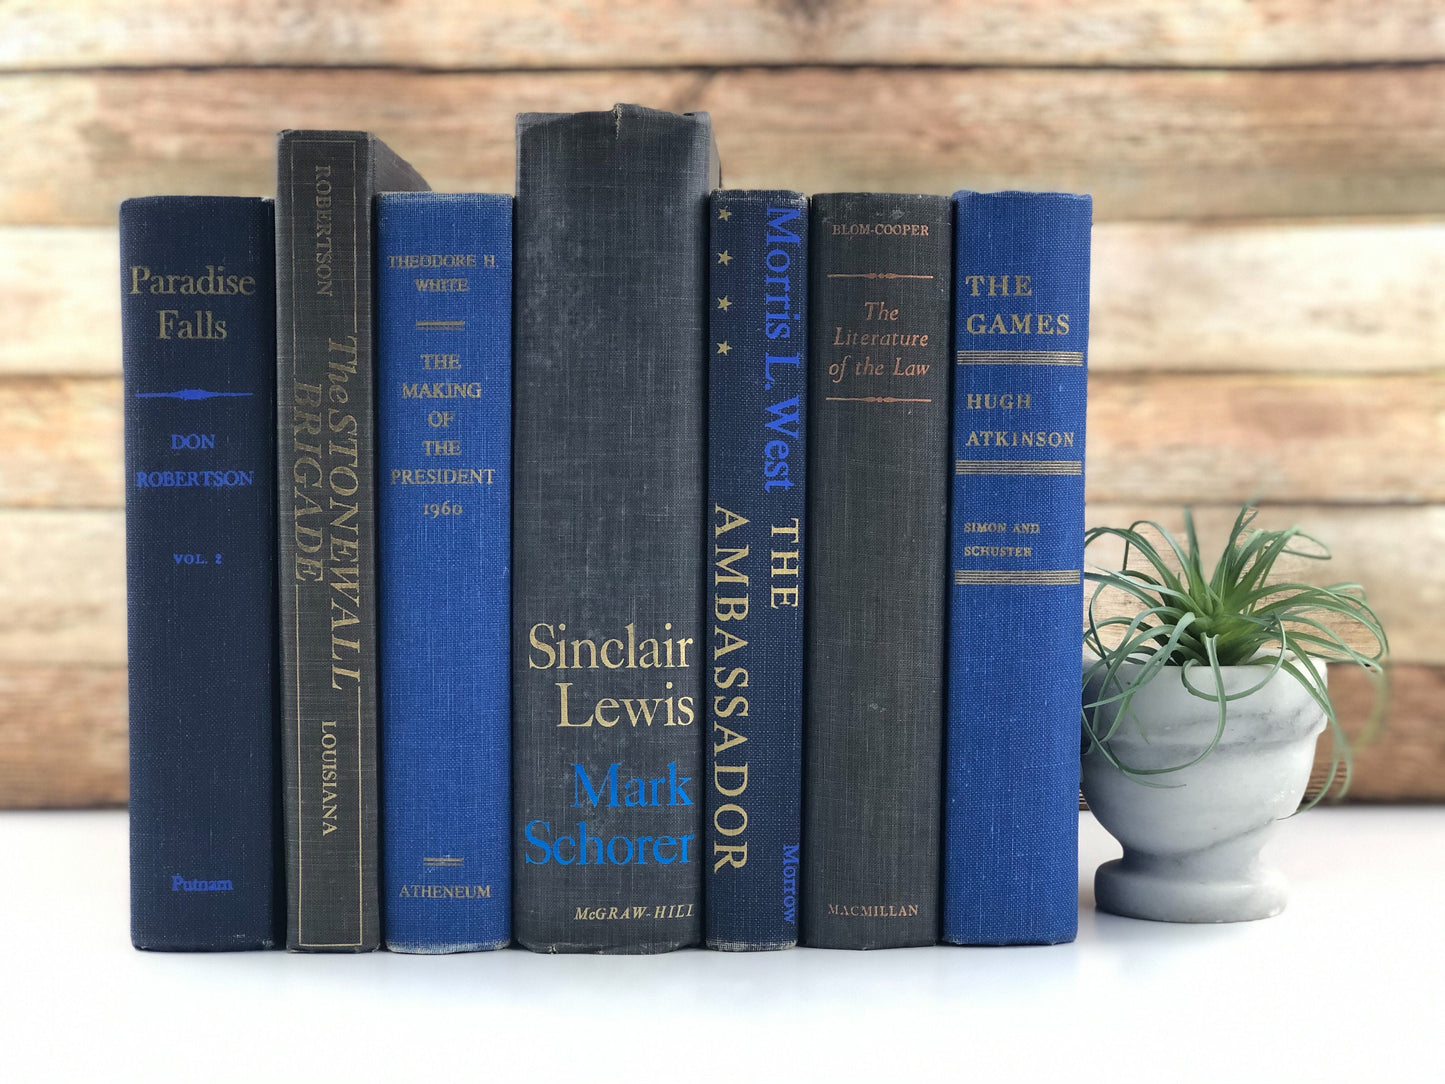 Blue and Gray Books by the Foot